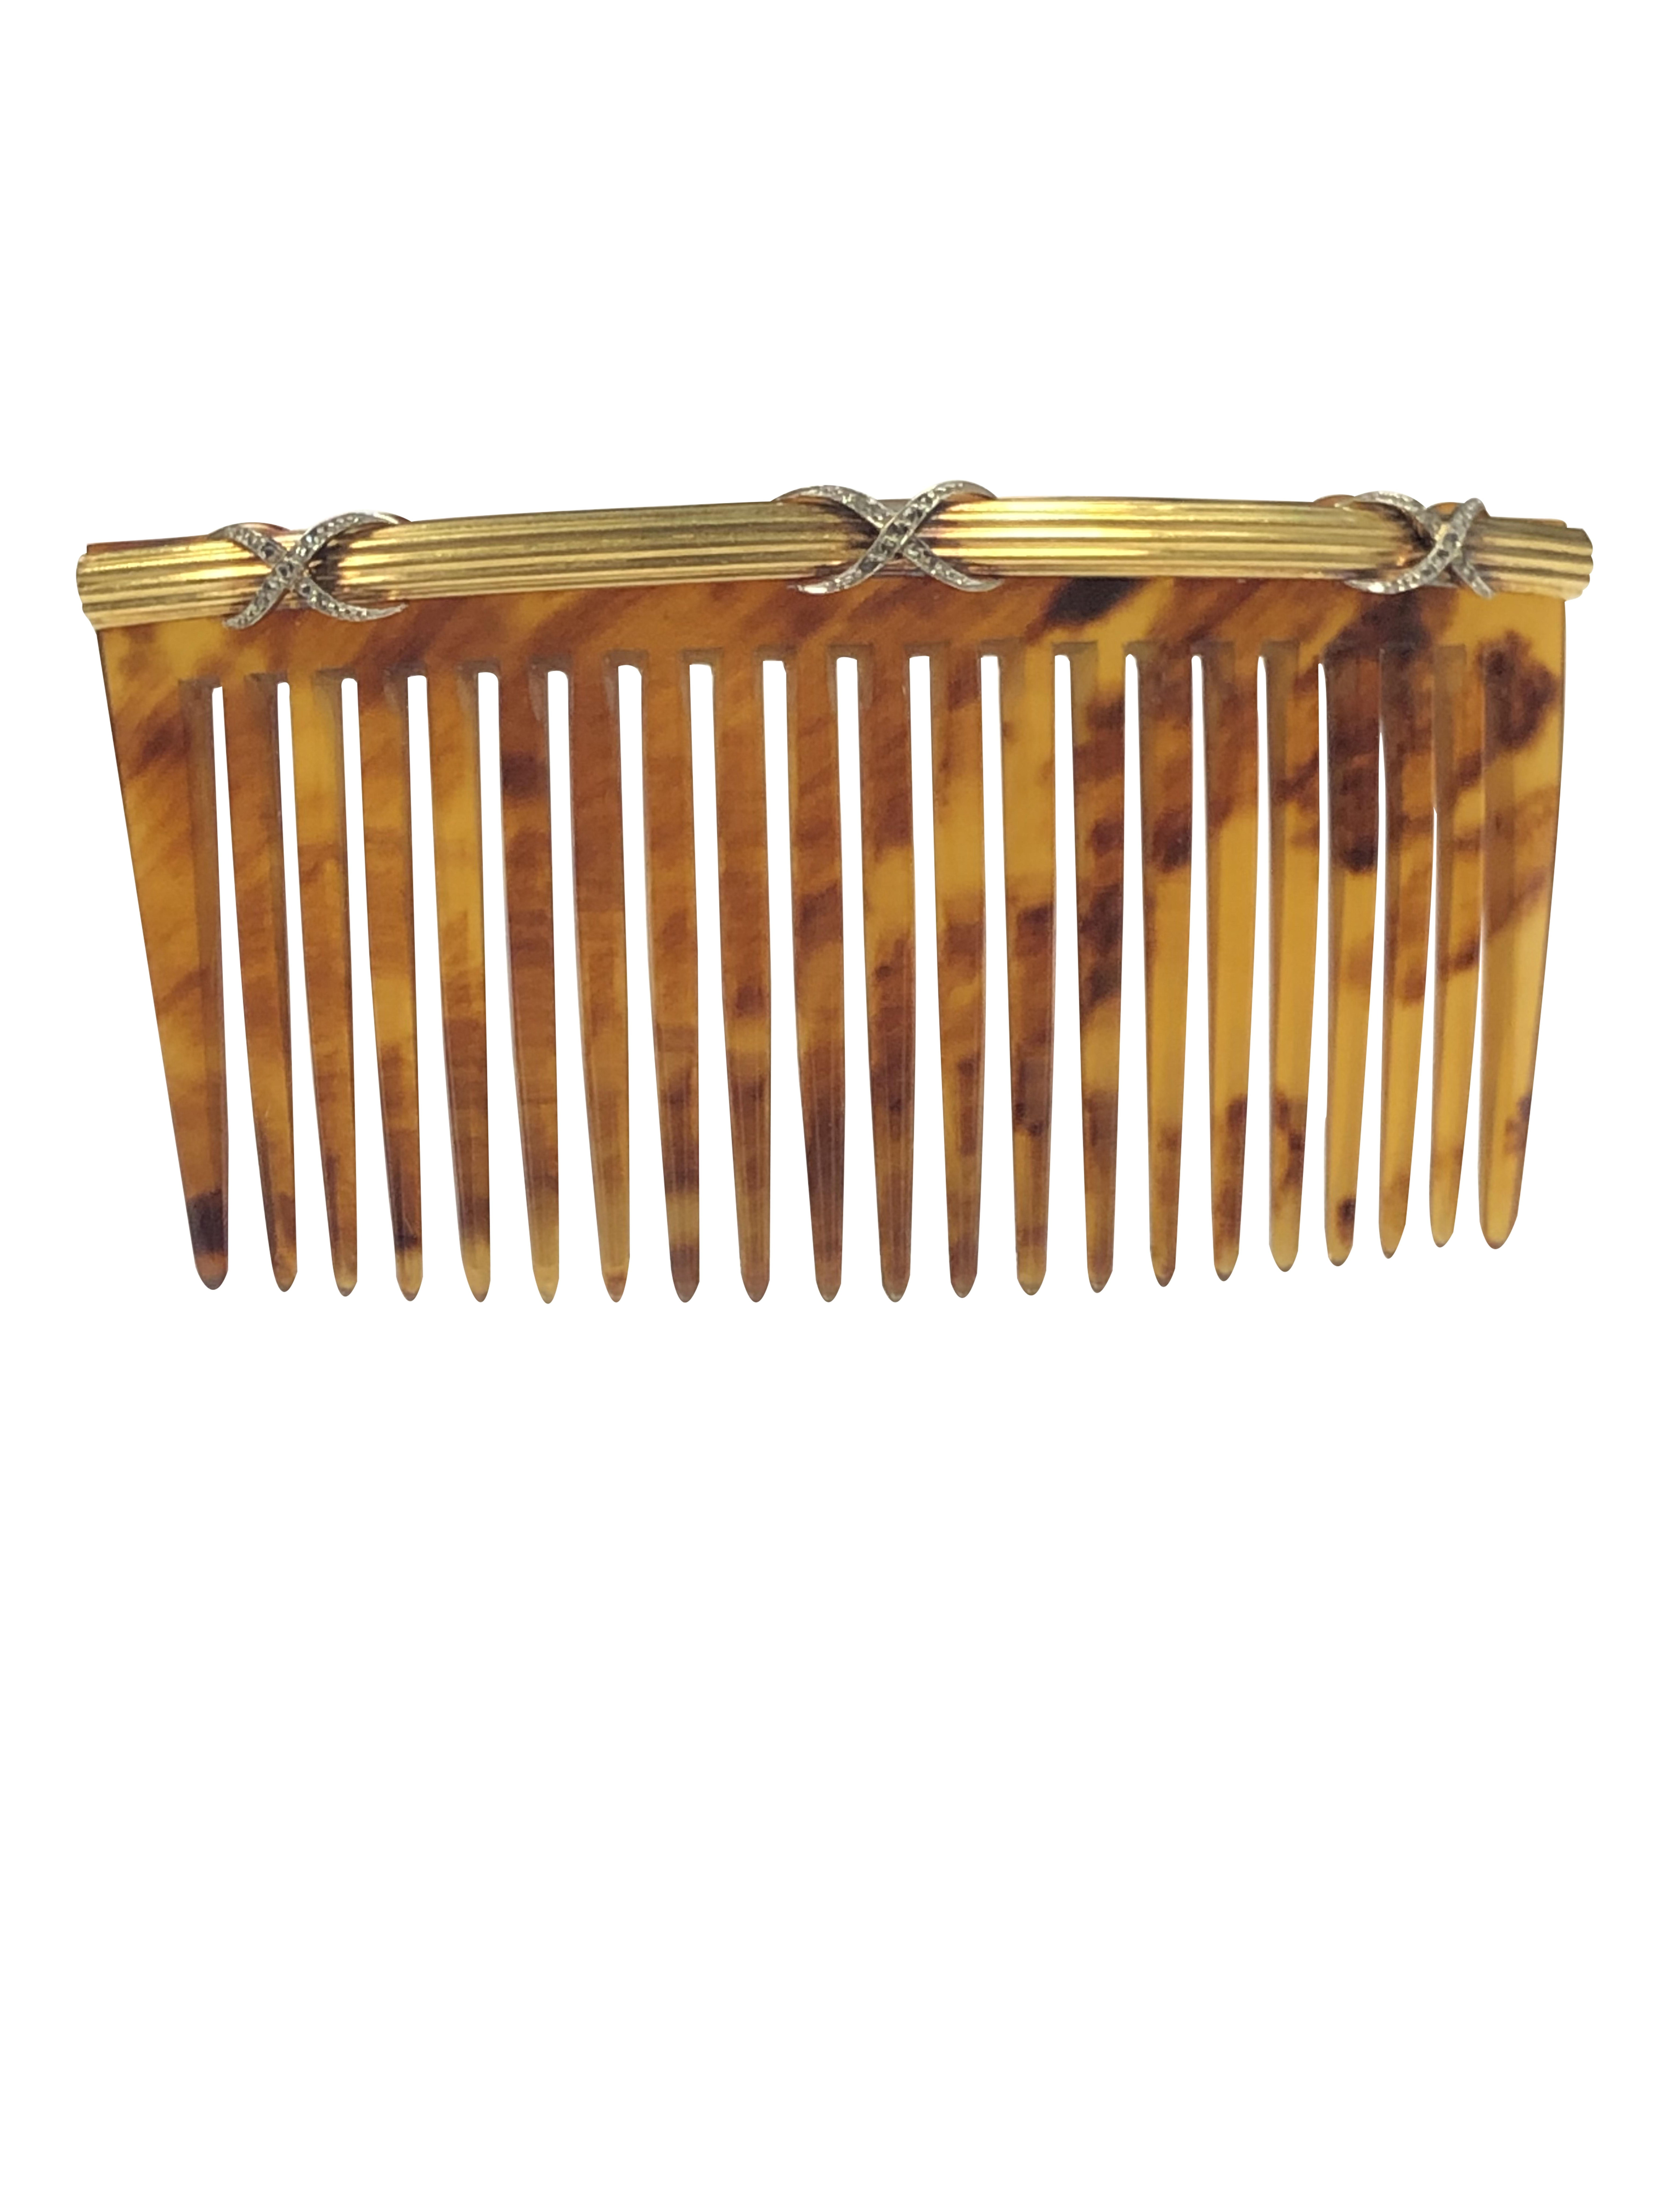 antique tortoise shell hair combs